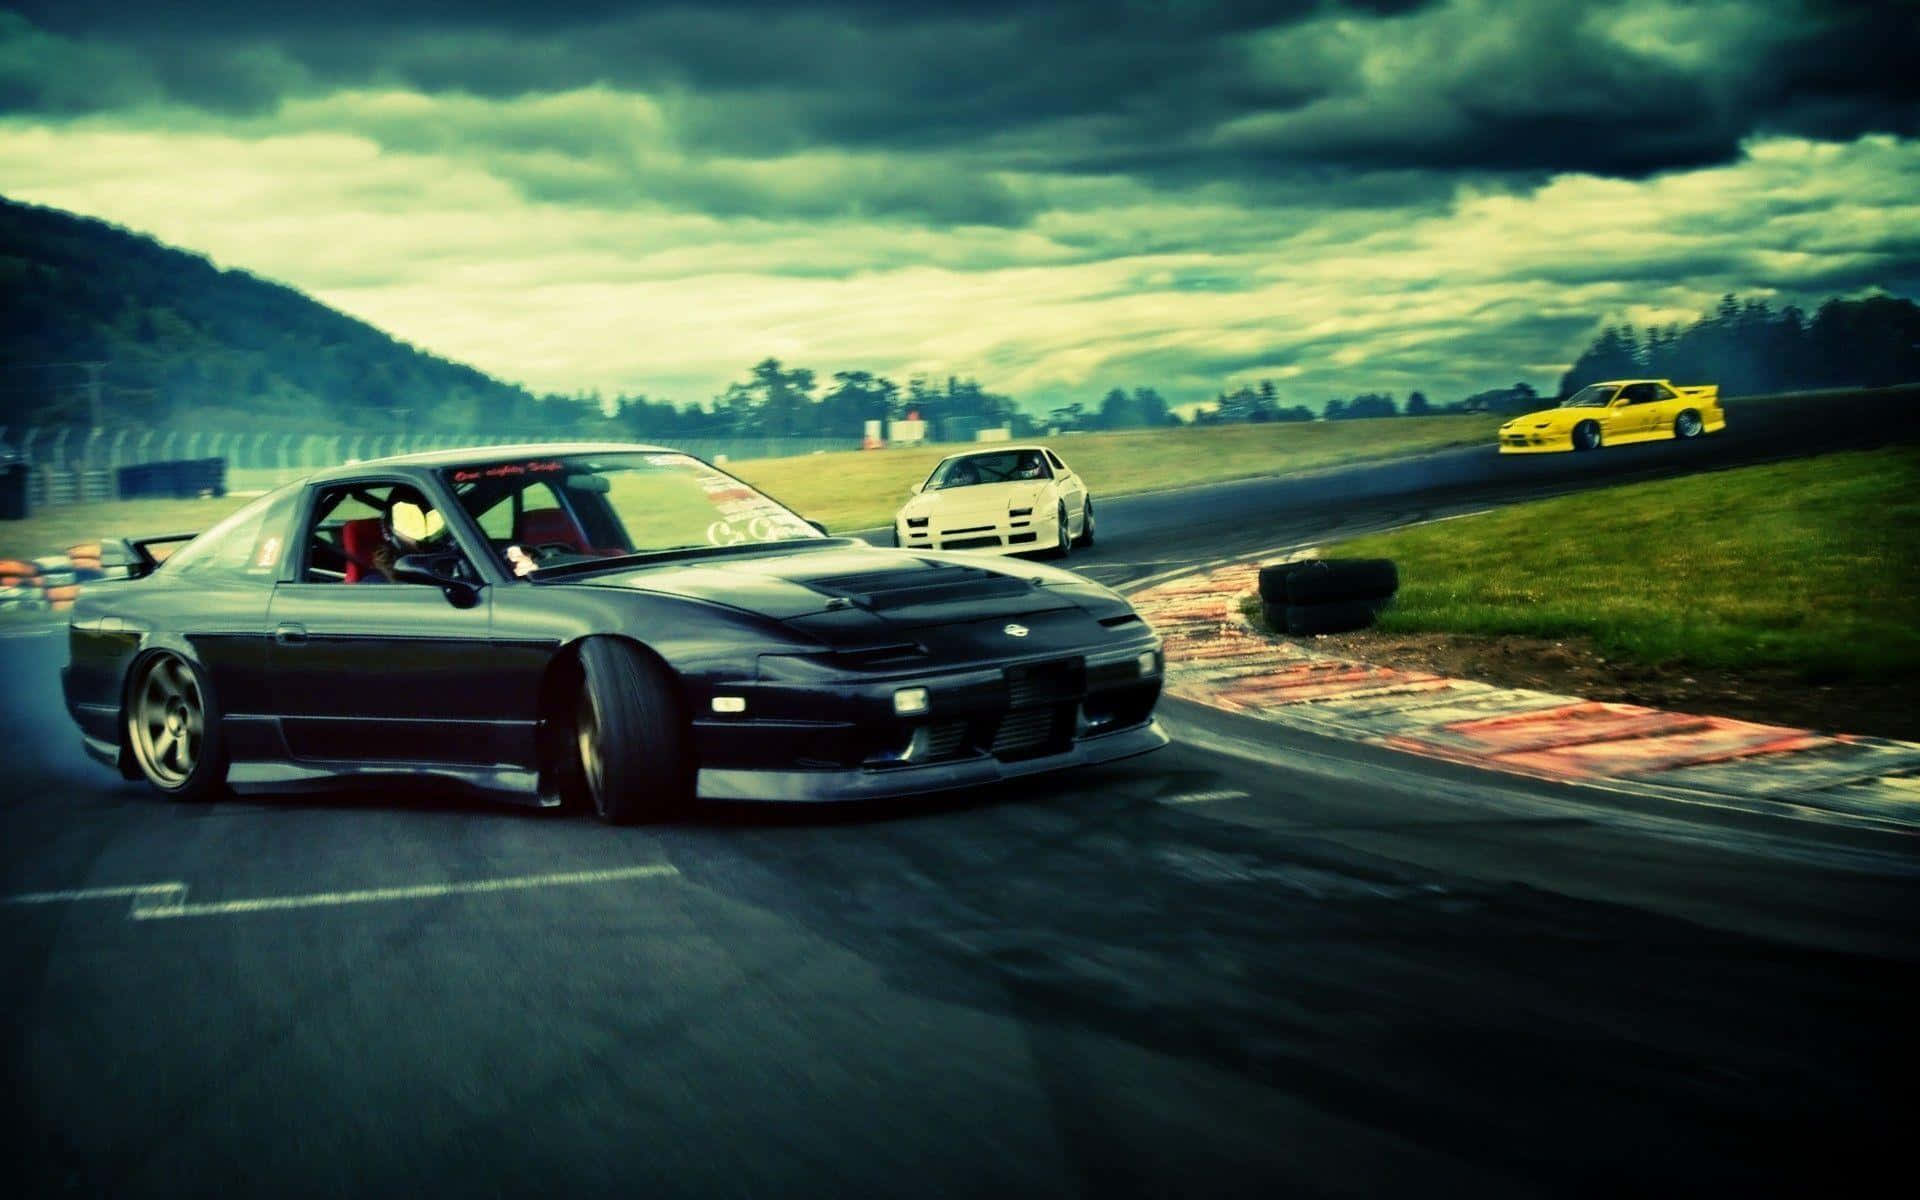 Step into the Future with the Nissan 180sx Wallpaper